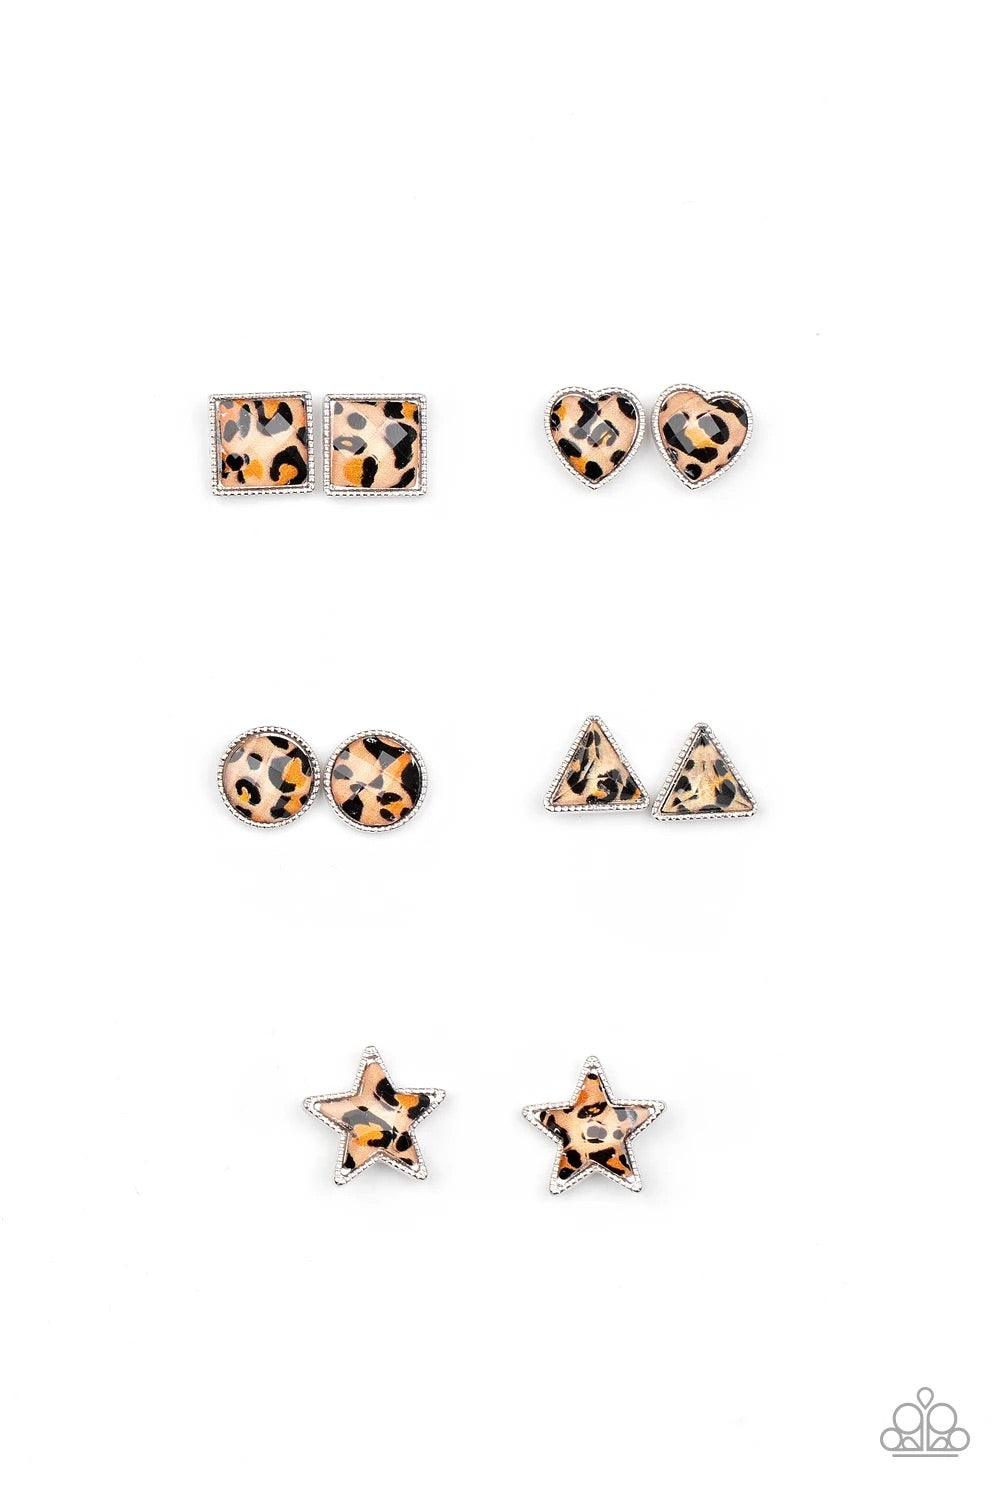 Paparazzi Accessories Starlet Shimmer Earrings: #19 Heart Jewelry